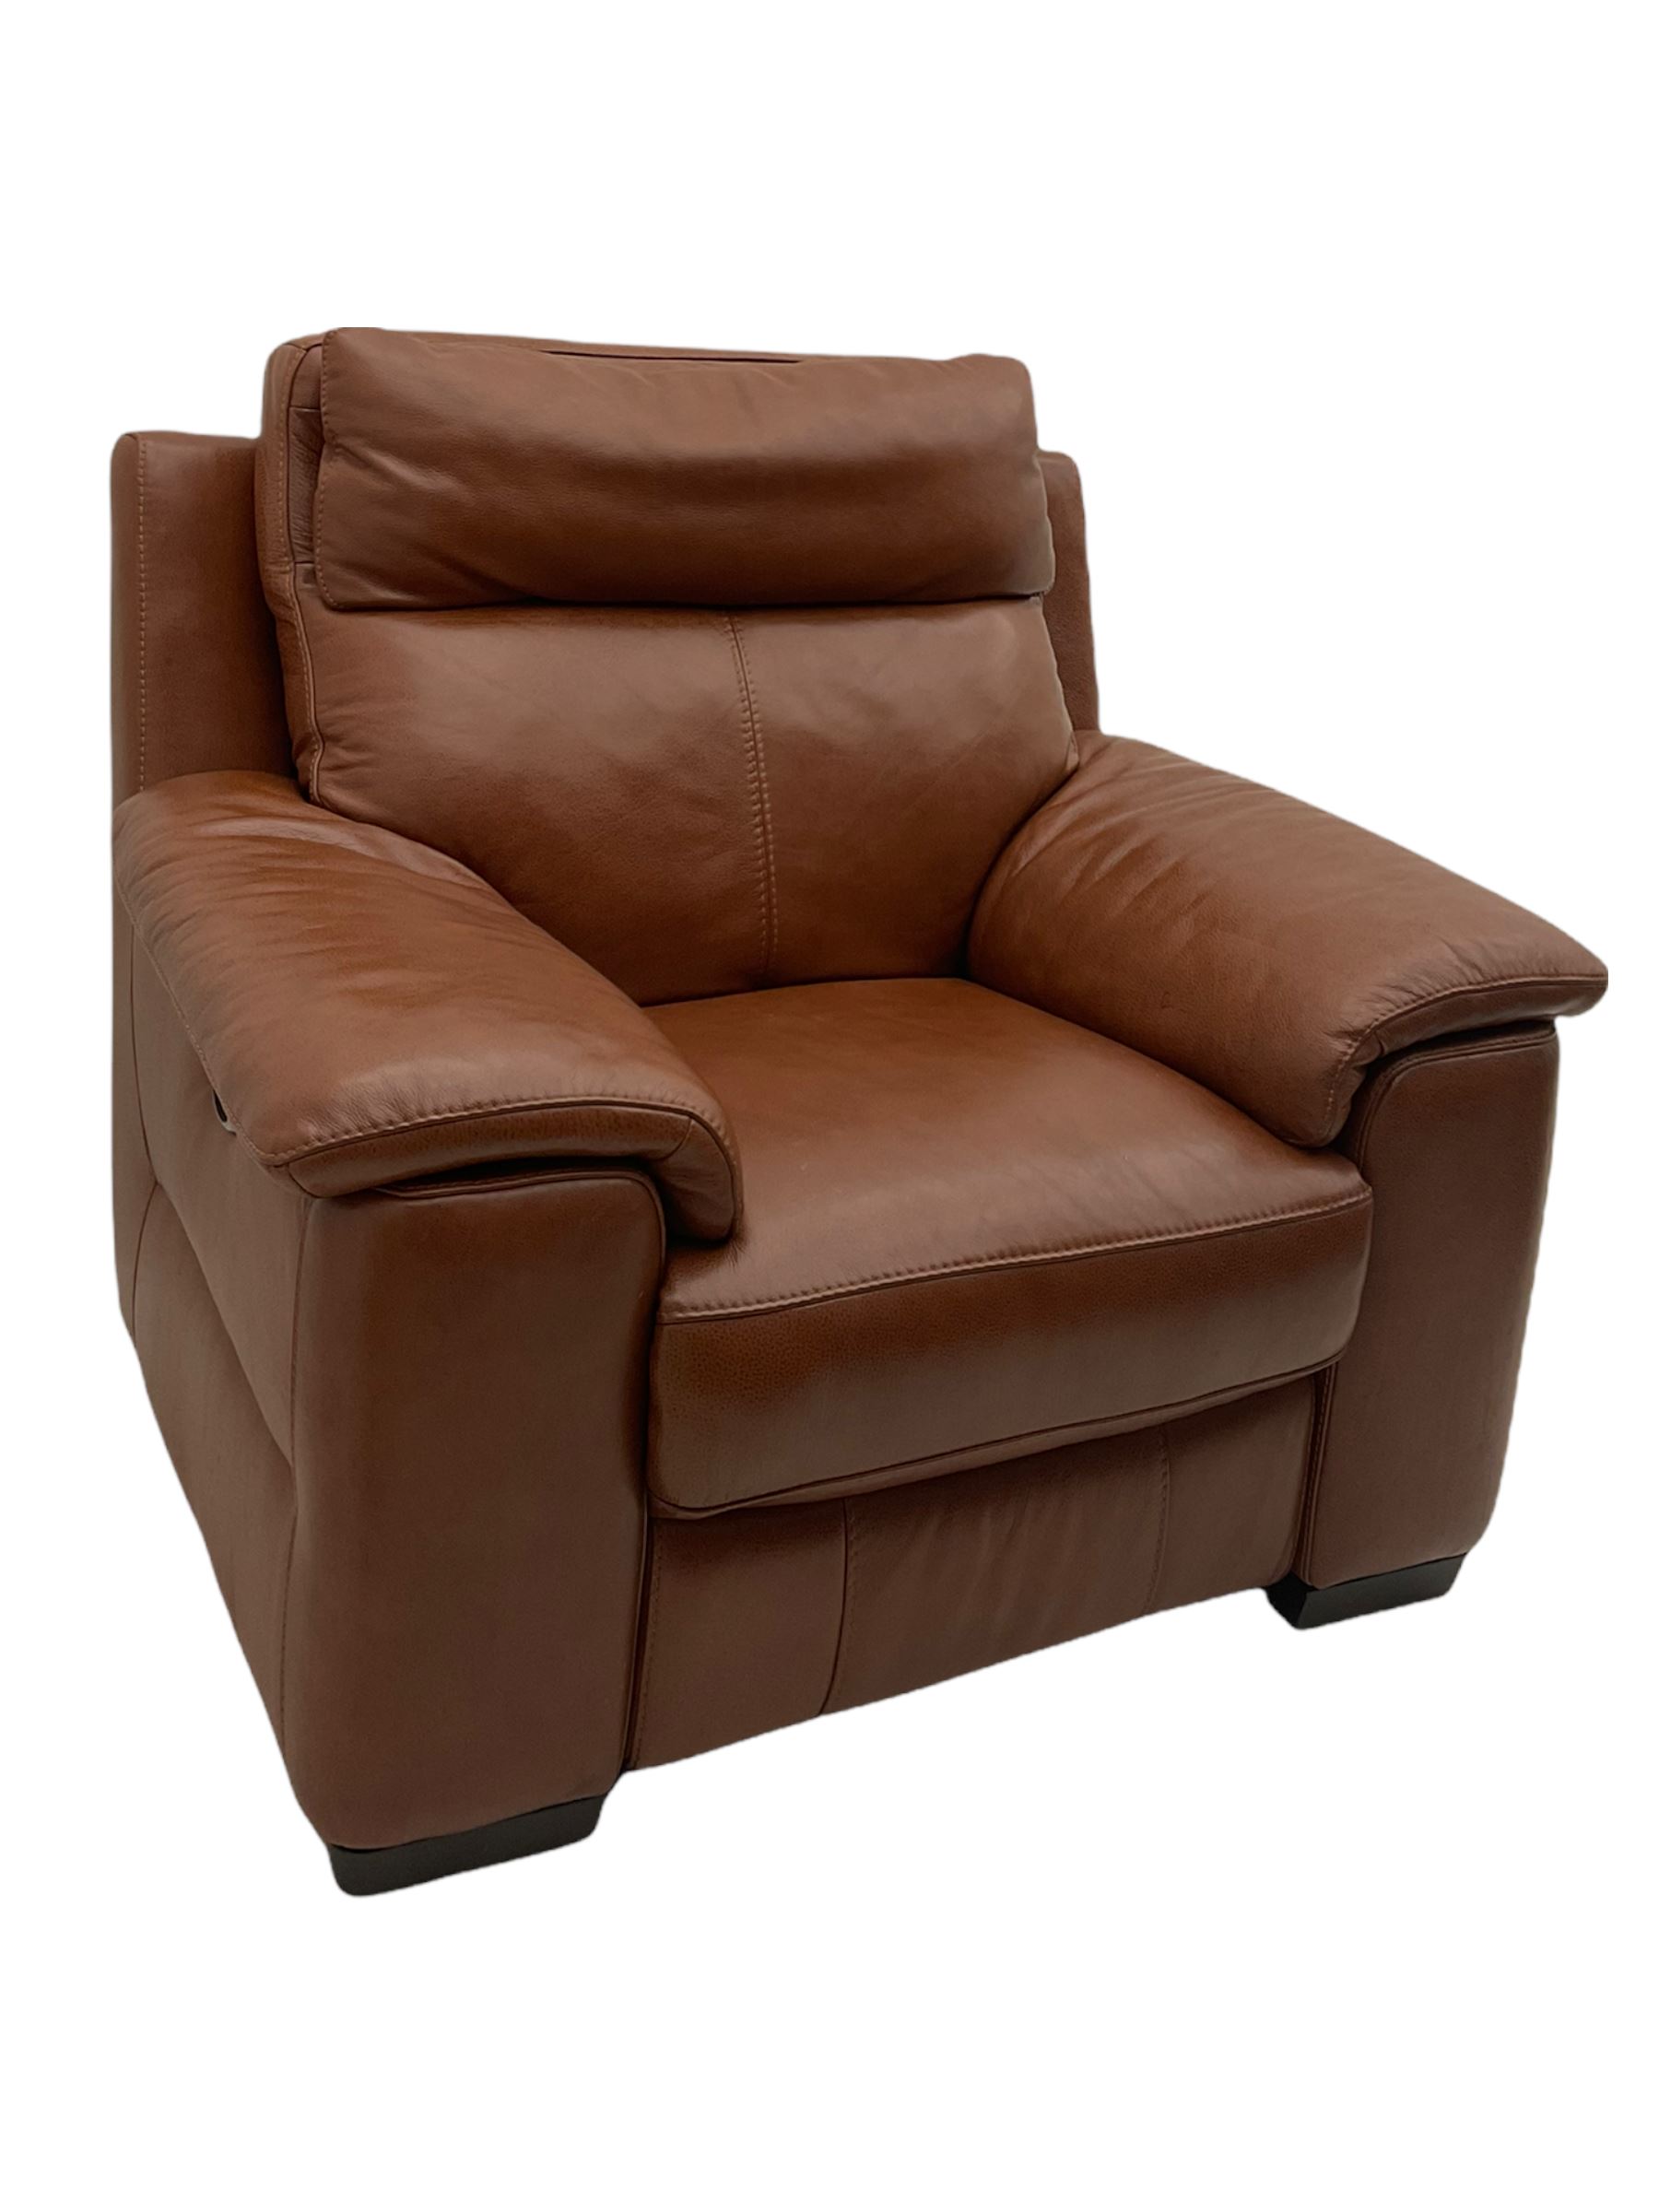 Three electric reclining sofa upholstered in tan leather - Image 15 of 23